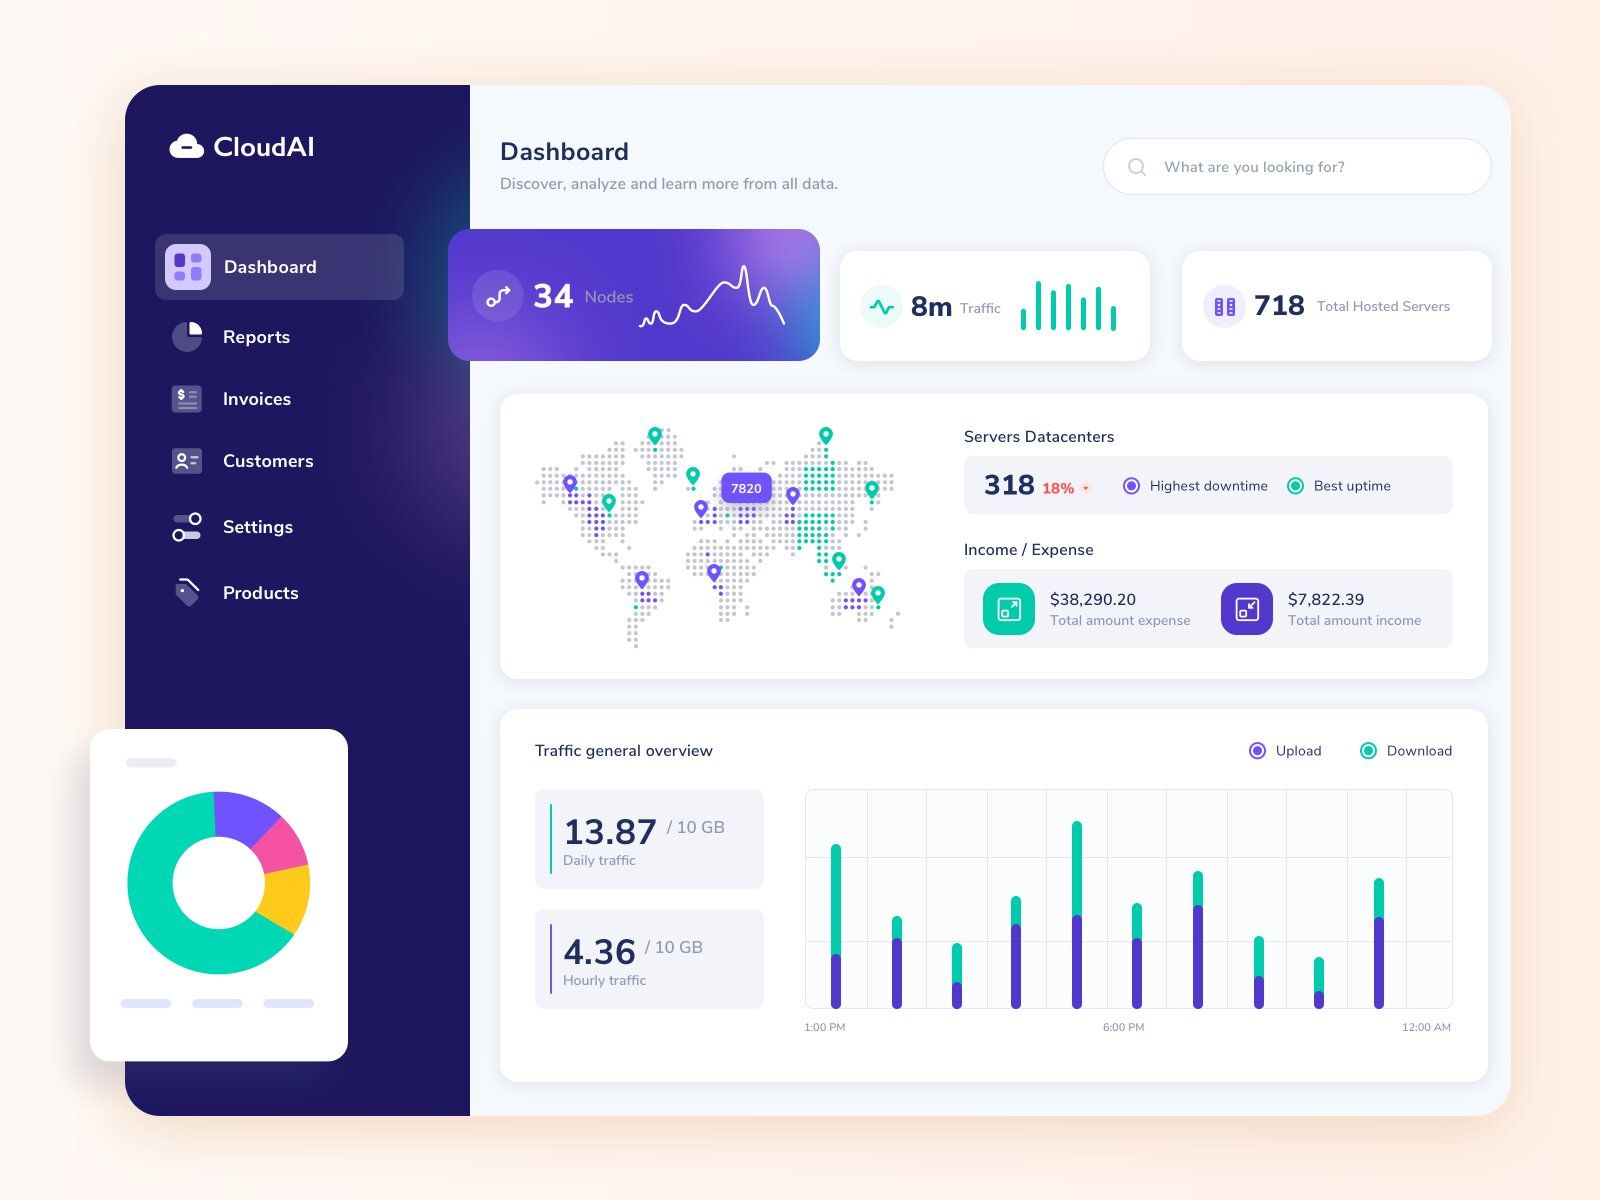 Tax software developers can build you a mobile application developed for the tax software specifically or enable many other features like credit issuing, tax return templates, revenue tracking, and many others (*image by [Emy Lascan](https://dribbble.com/mazepixel){ rel="nofollow" target="_blank" .default-md}*)